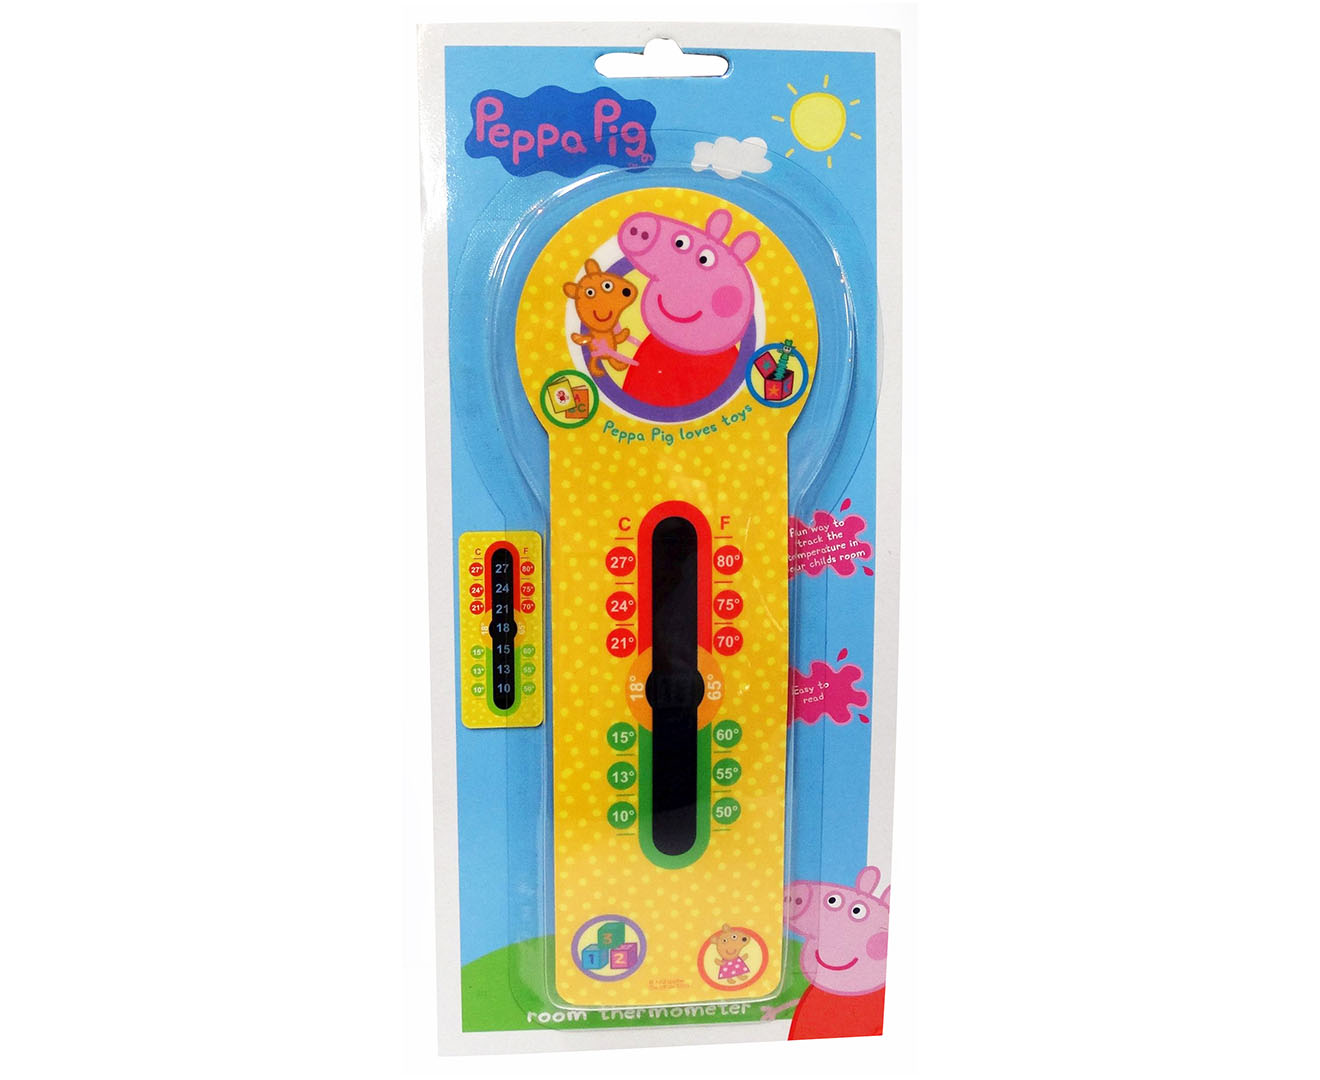 Peppa Pig Room Thermometer